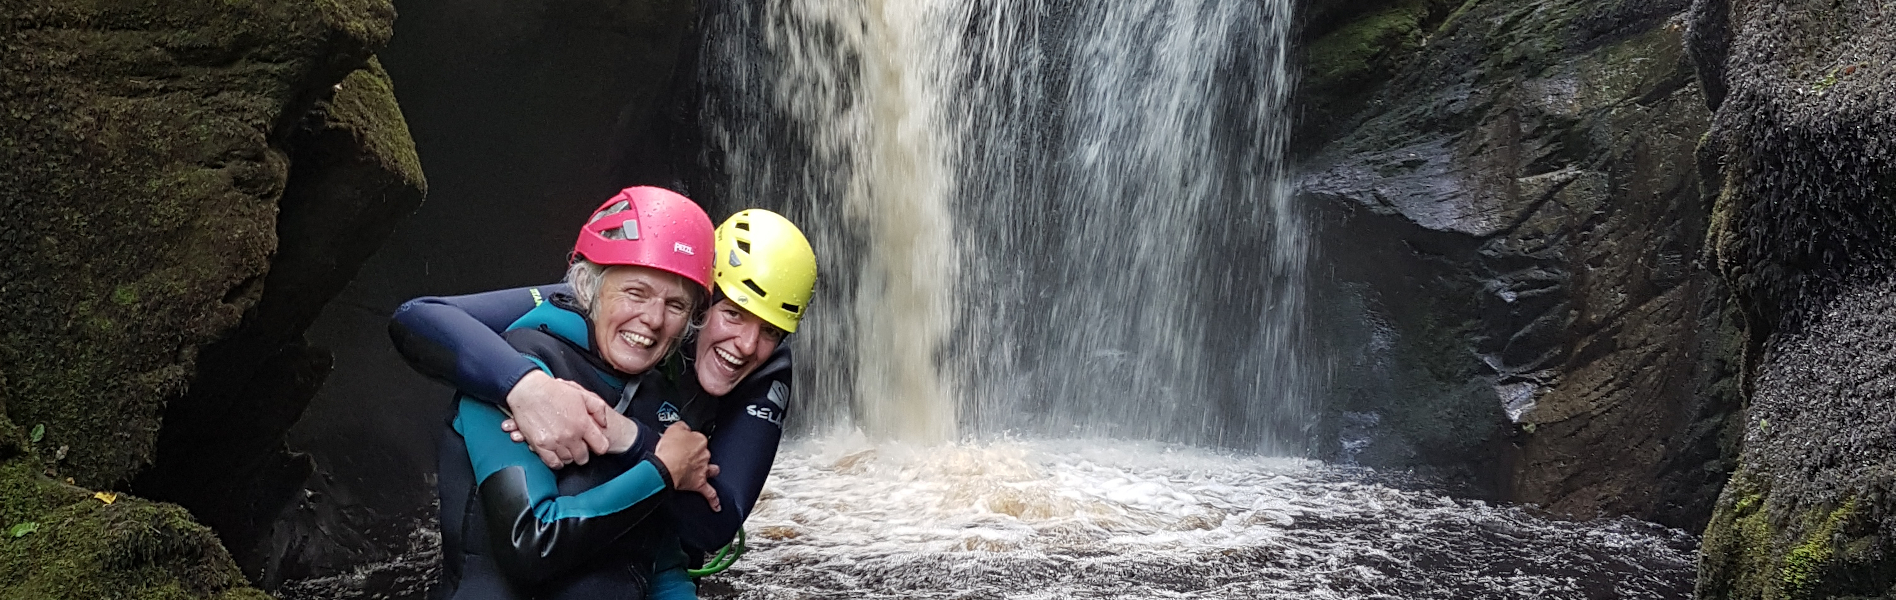 Extreme Canyoning in Snowdonia North Wales with Adventure Activities Wales